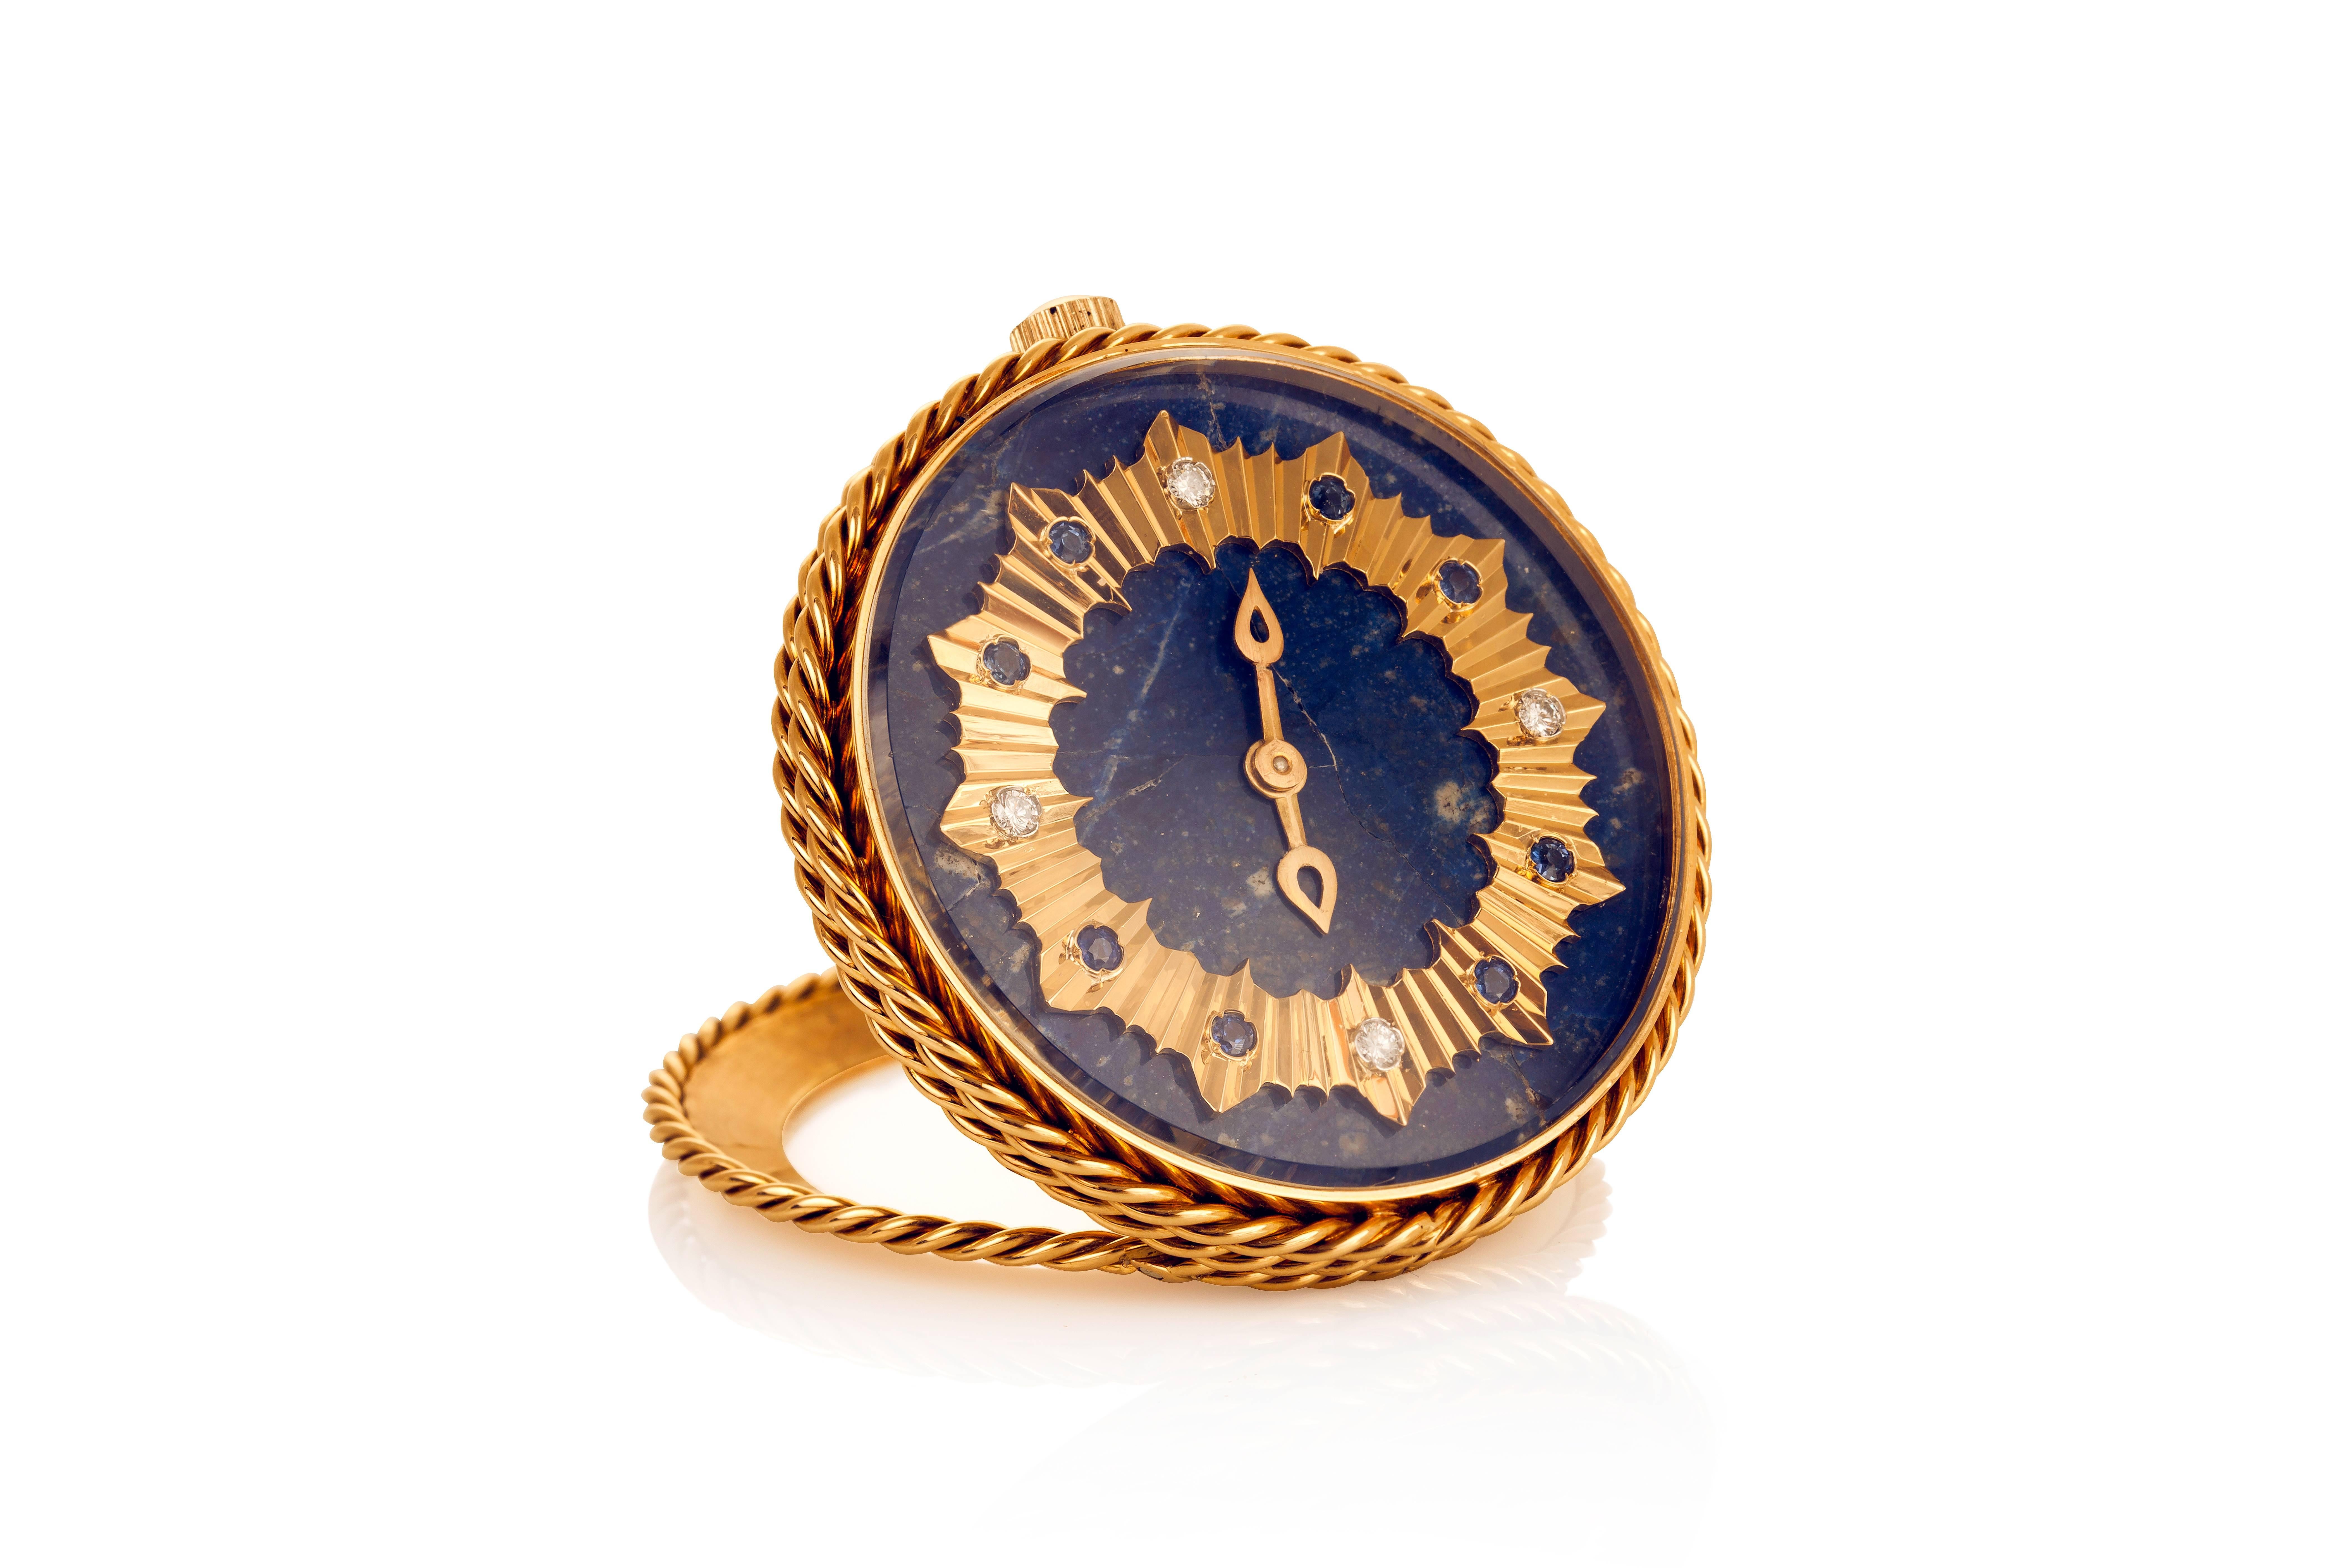 This beautifully detailed travel clock features a lapis lazuli face with a yellow gold sunburst with sapphire and diamond hour markers and a gold braided rope surrounding the case and fold-down stand.